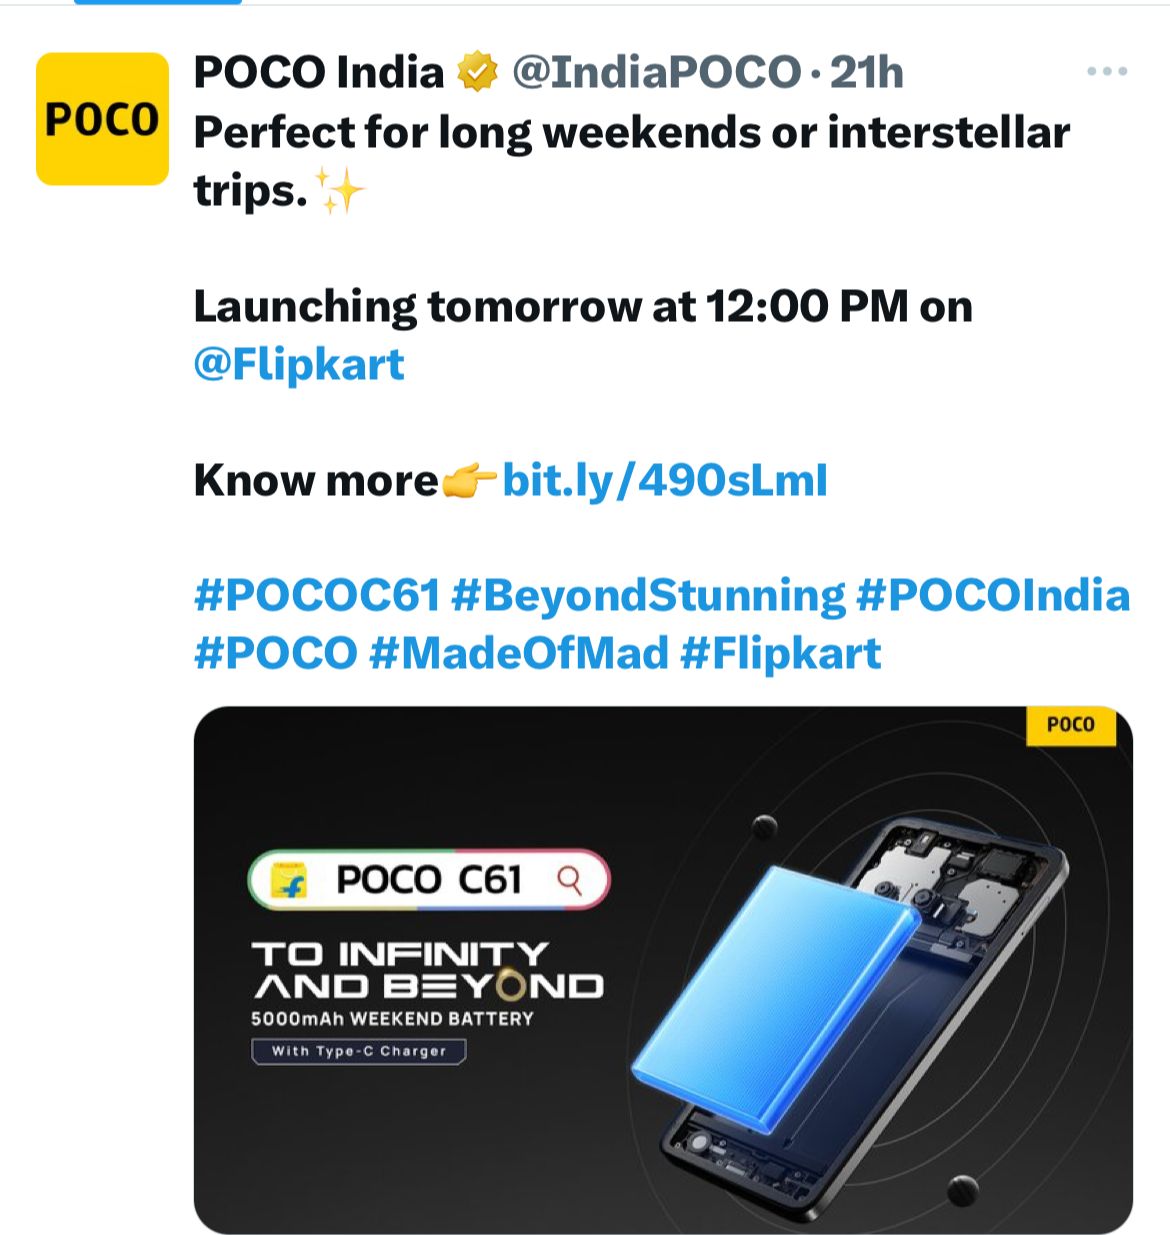 POCO C61 Pricing and Availability